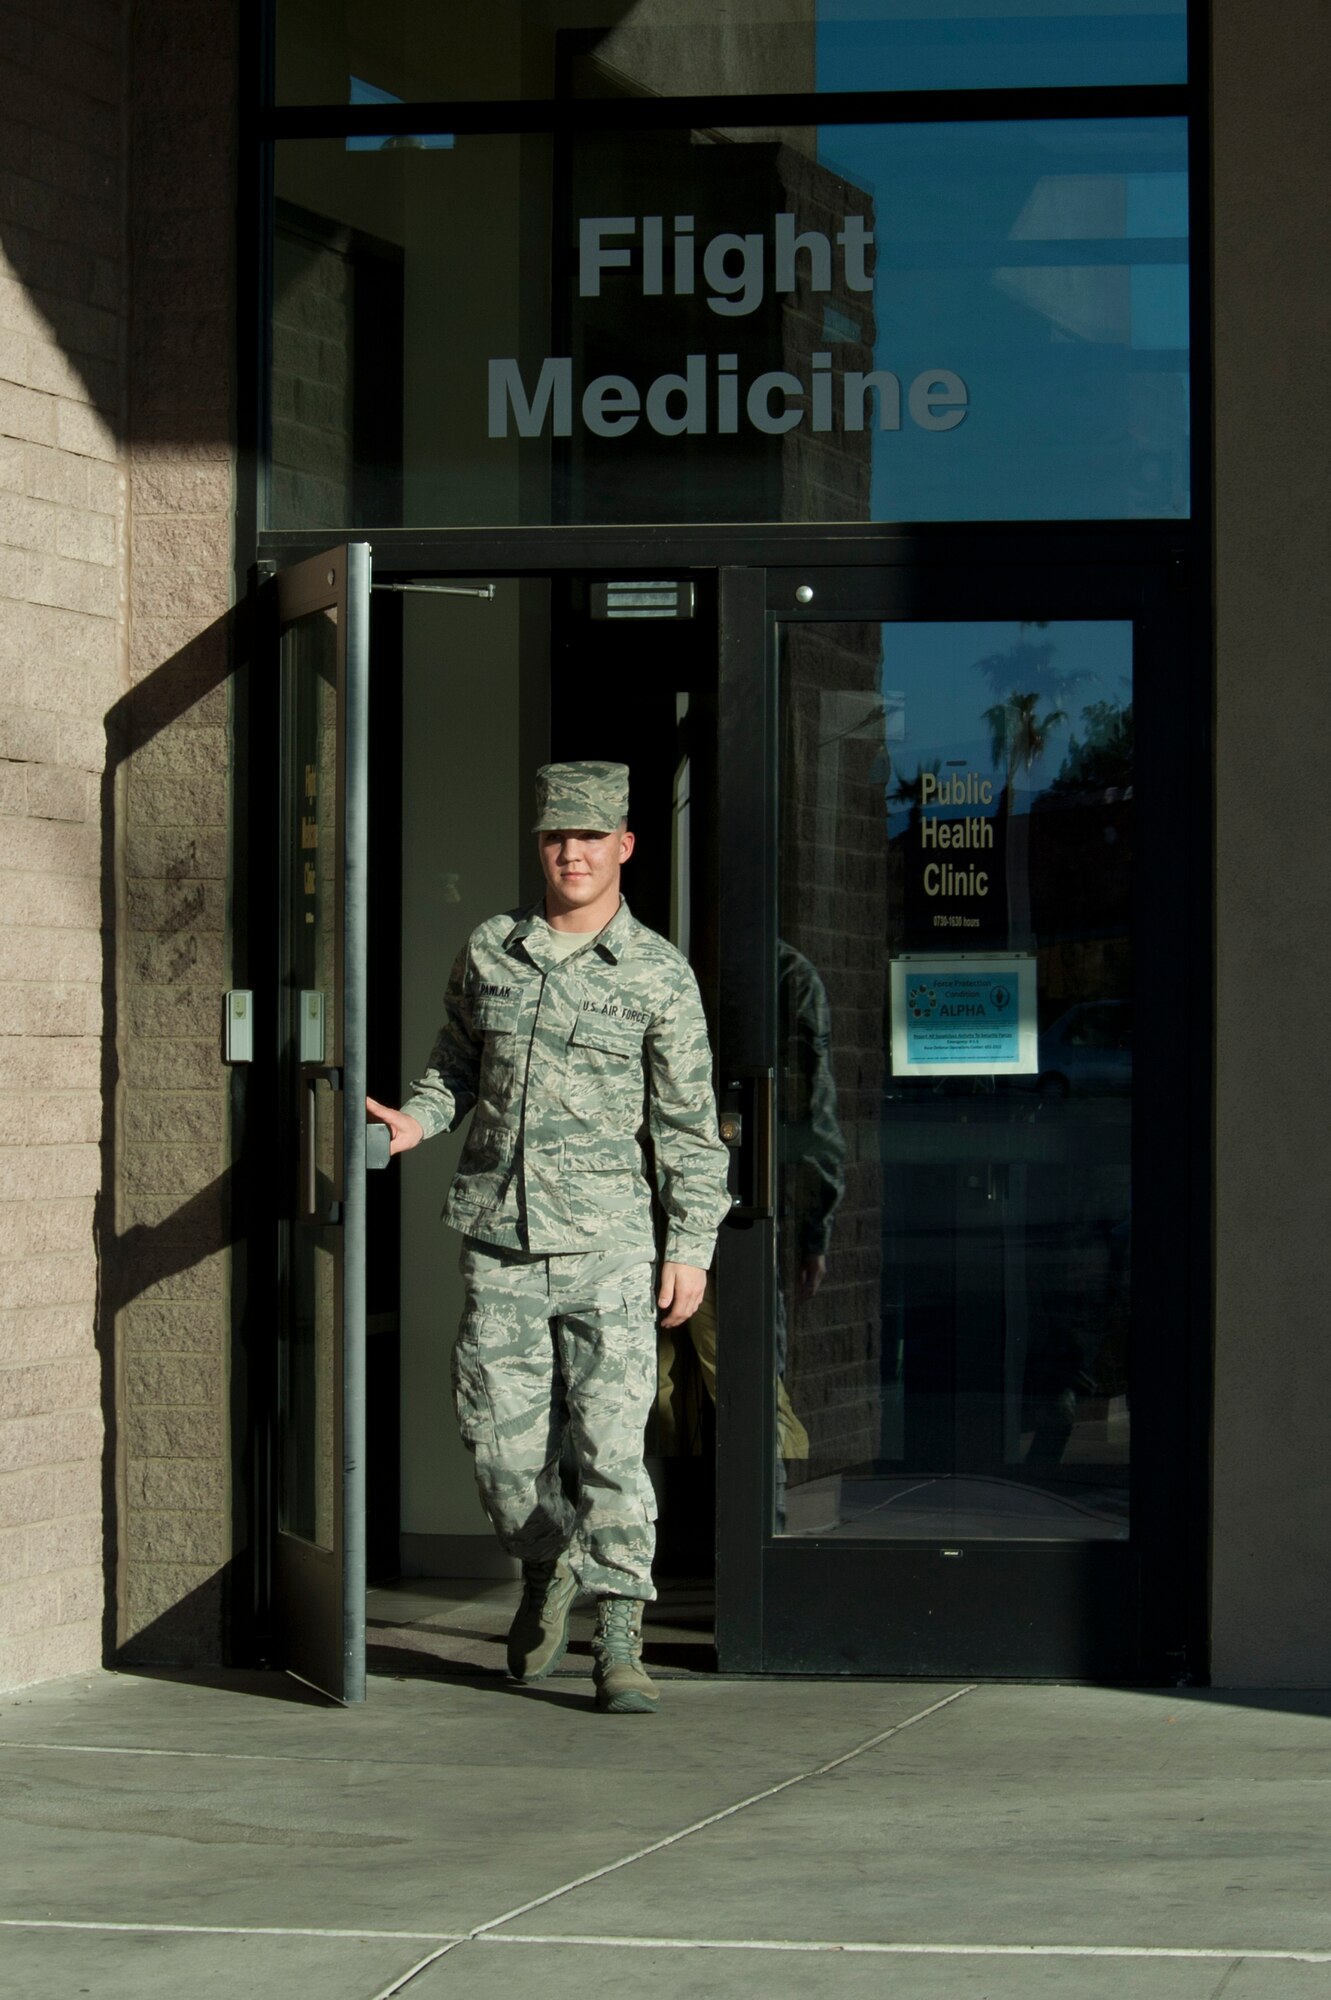 Senior Airman Brandon Pawlak, 99th Aerospace Medicine Squadron public health technician, leaves the Aerospace Medicine clinic Jan. 13, 2014, at Nellis Air Force Base. Nev. The 99th AMDS performs a number of operations ranging from certifying aircrew medically to responding to medical emergencies on the flightline. (U.S. Air Force photo/Airman 1st Class Timothy Young)